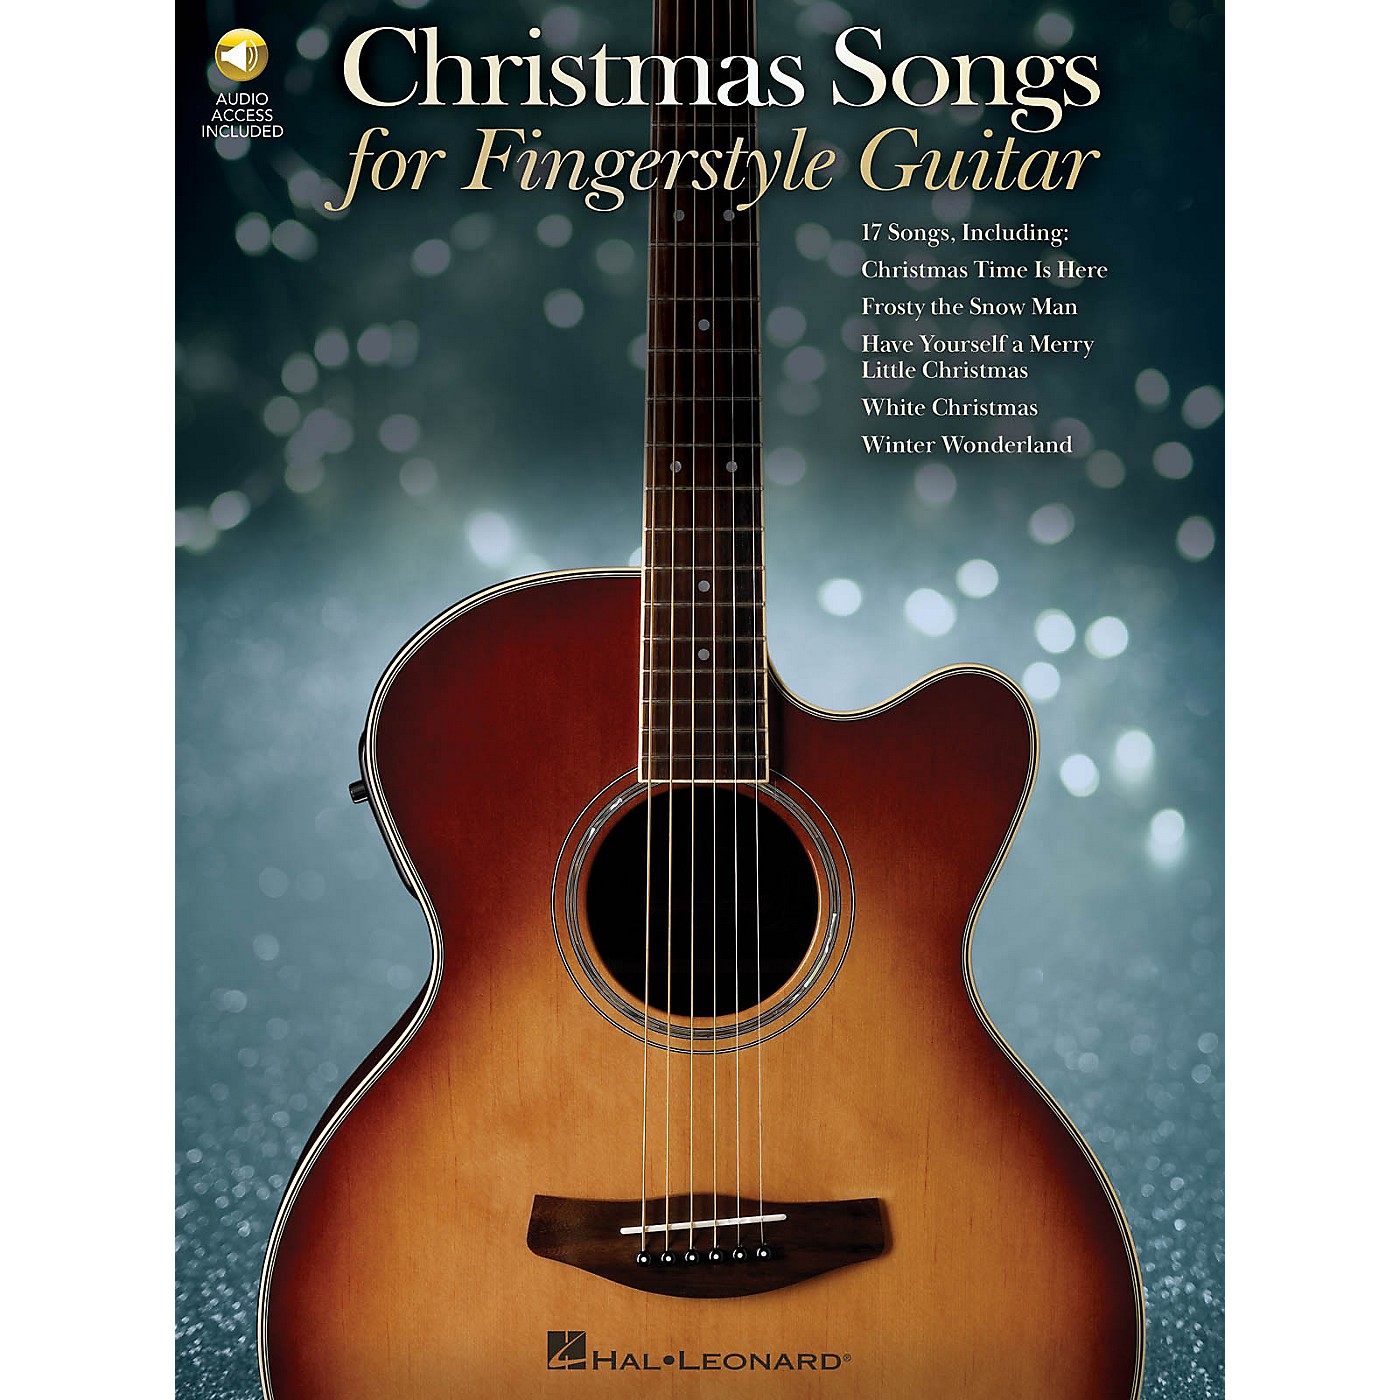 Hal Leonard Christmas Songs for Fingerstyle Guitar - Guitar Solo Songbook Book/Audio Online thumbnail